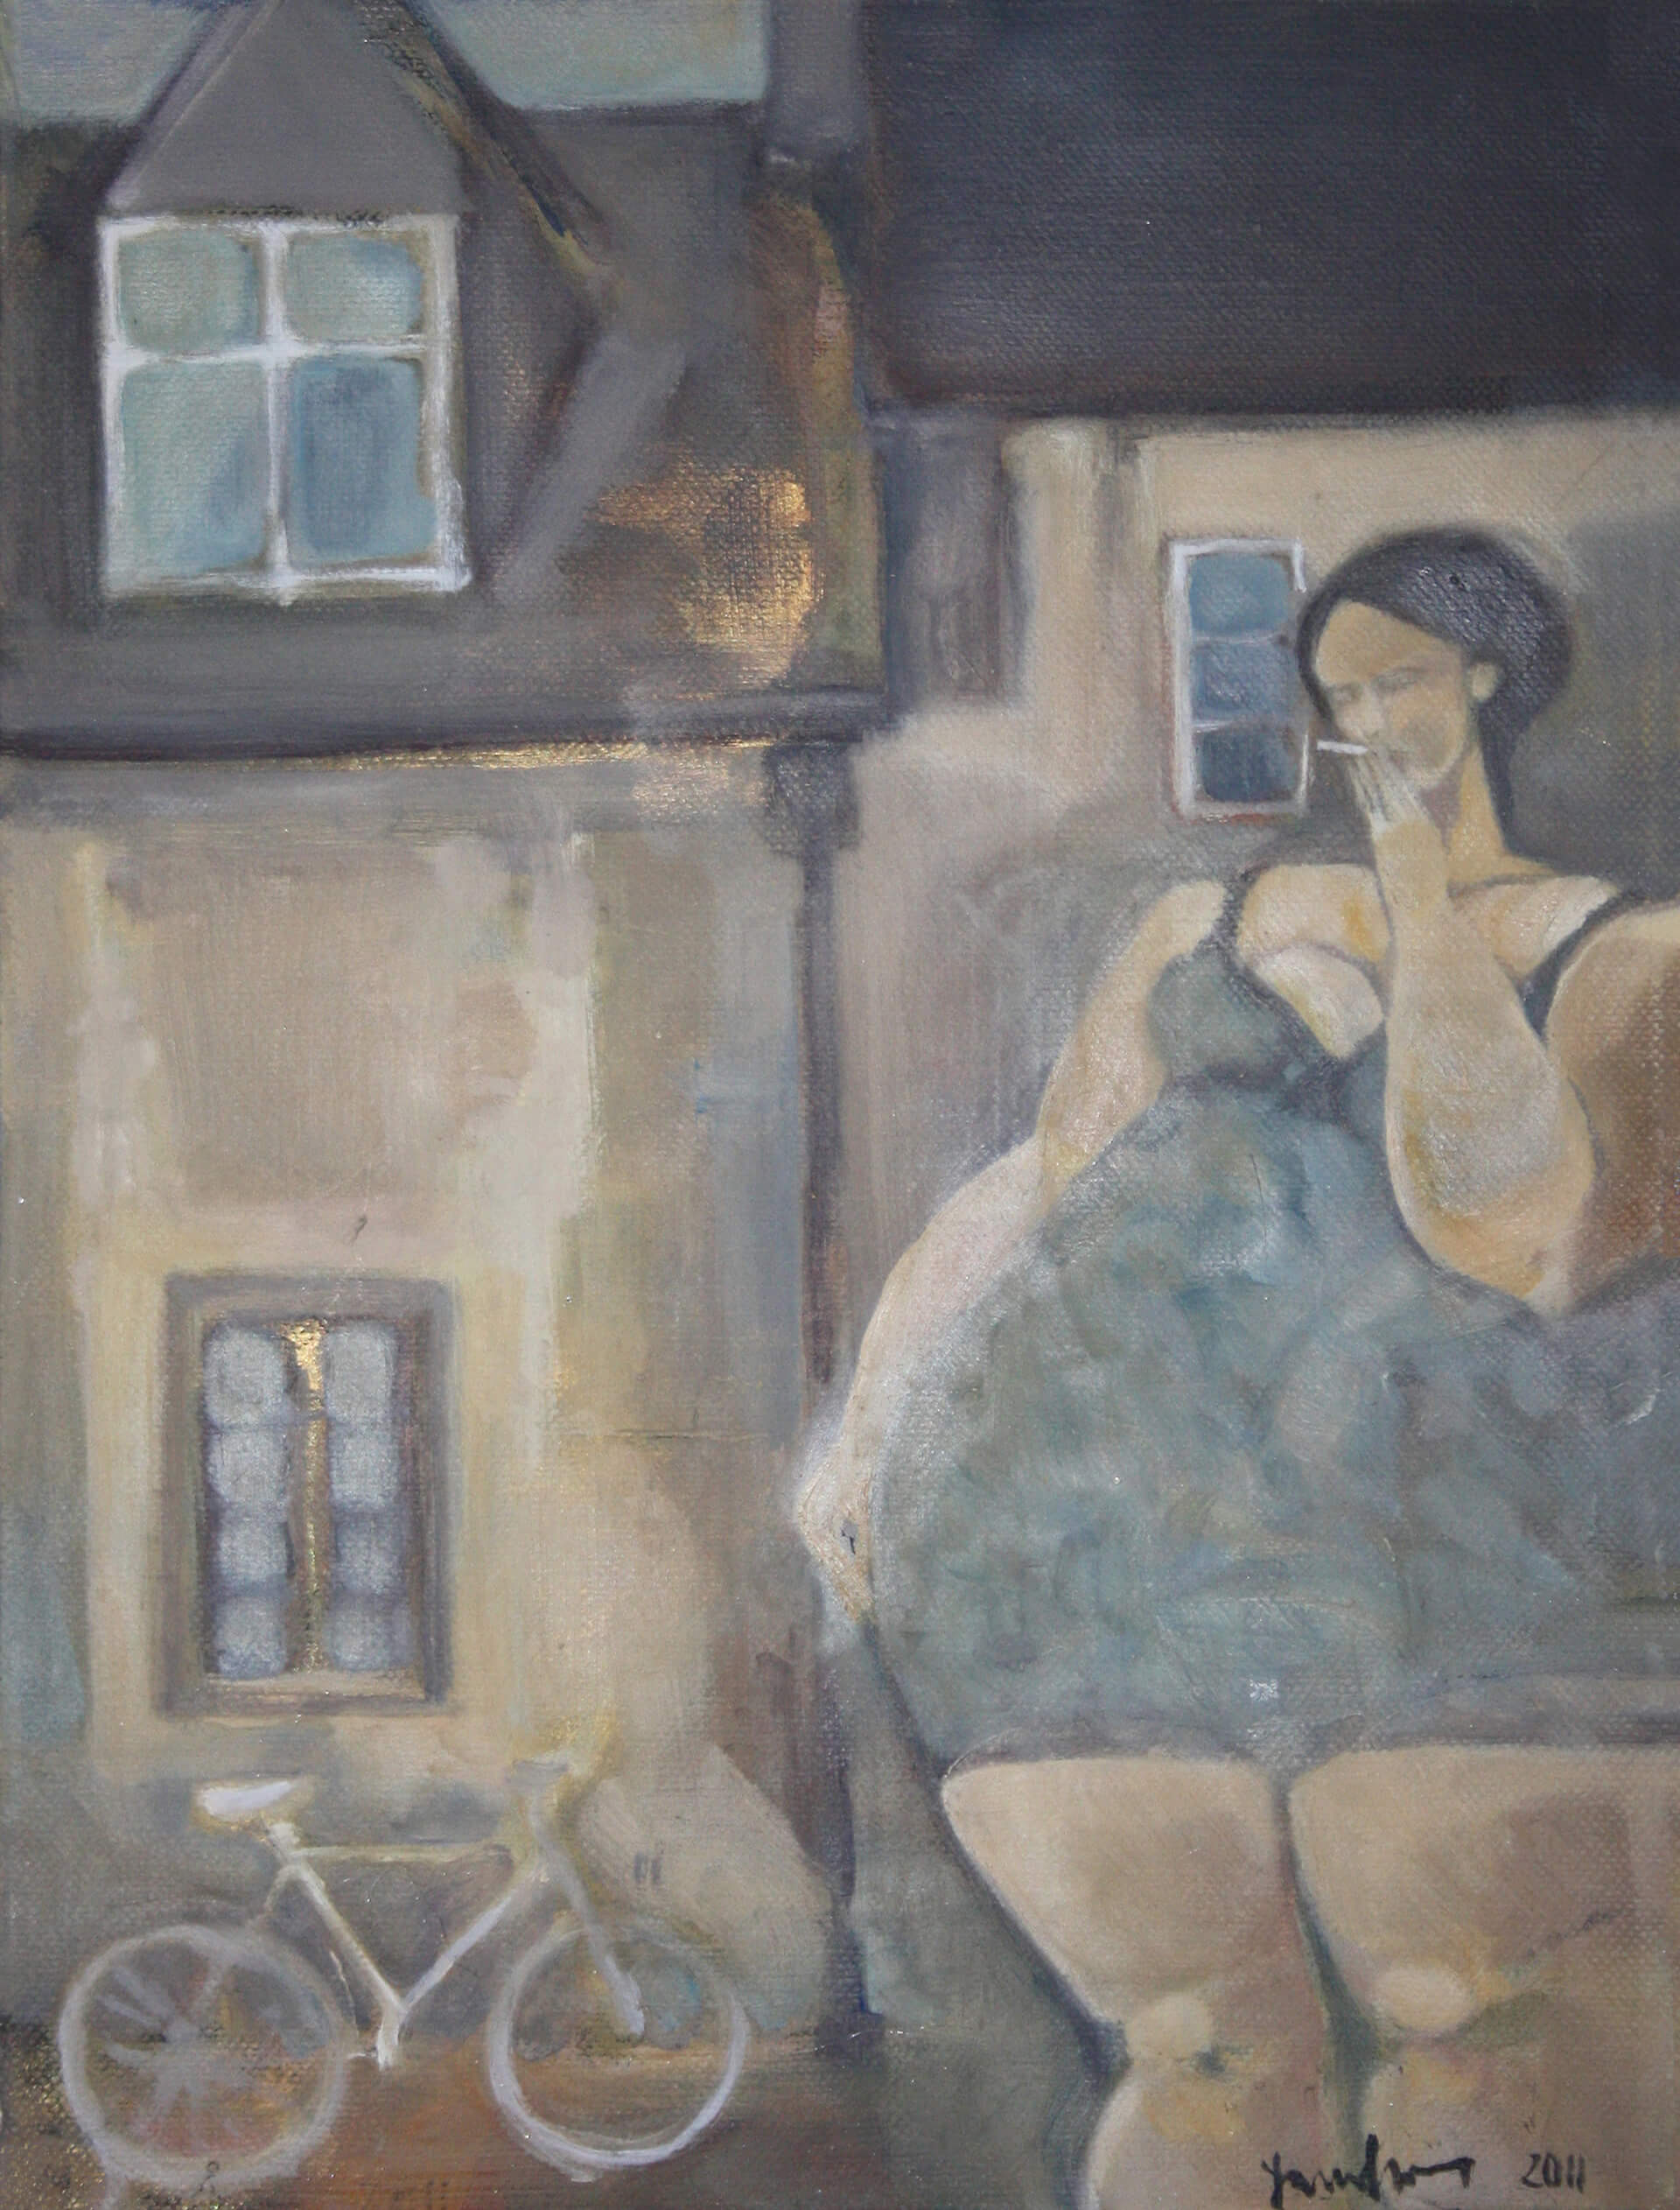 Lady in Oxford. 40x50 cm. Oil on canvas. Sold